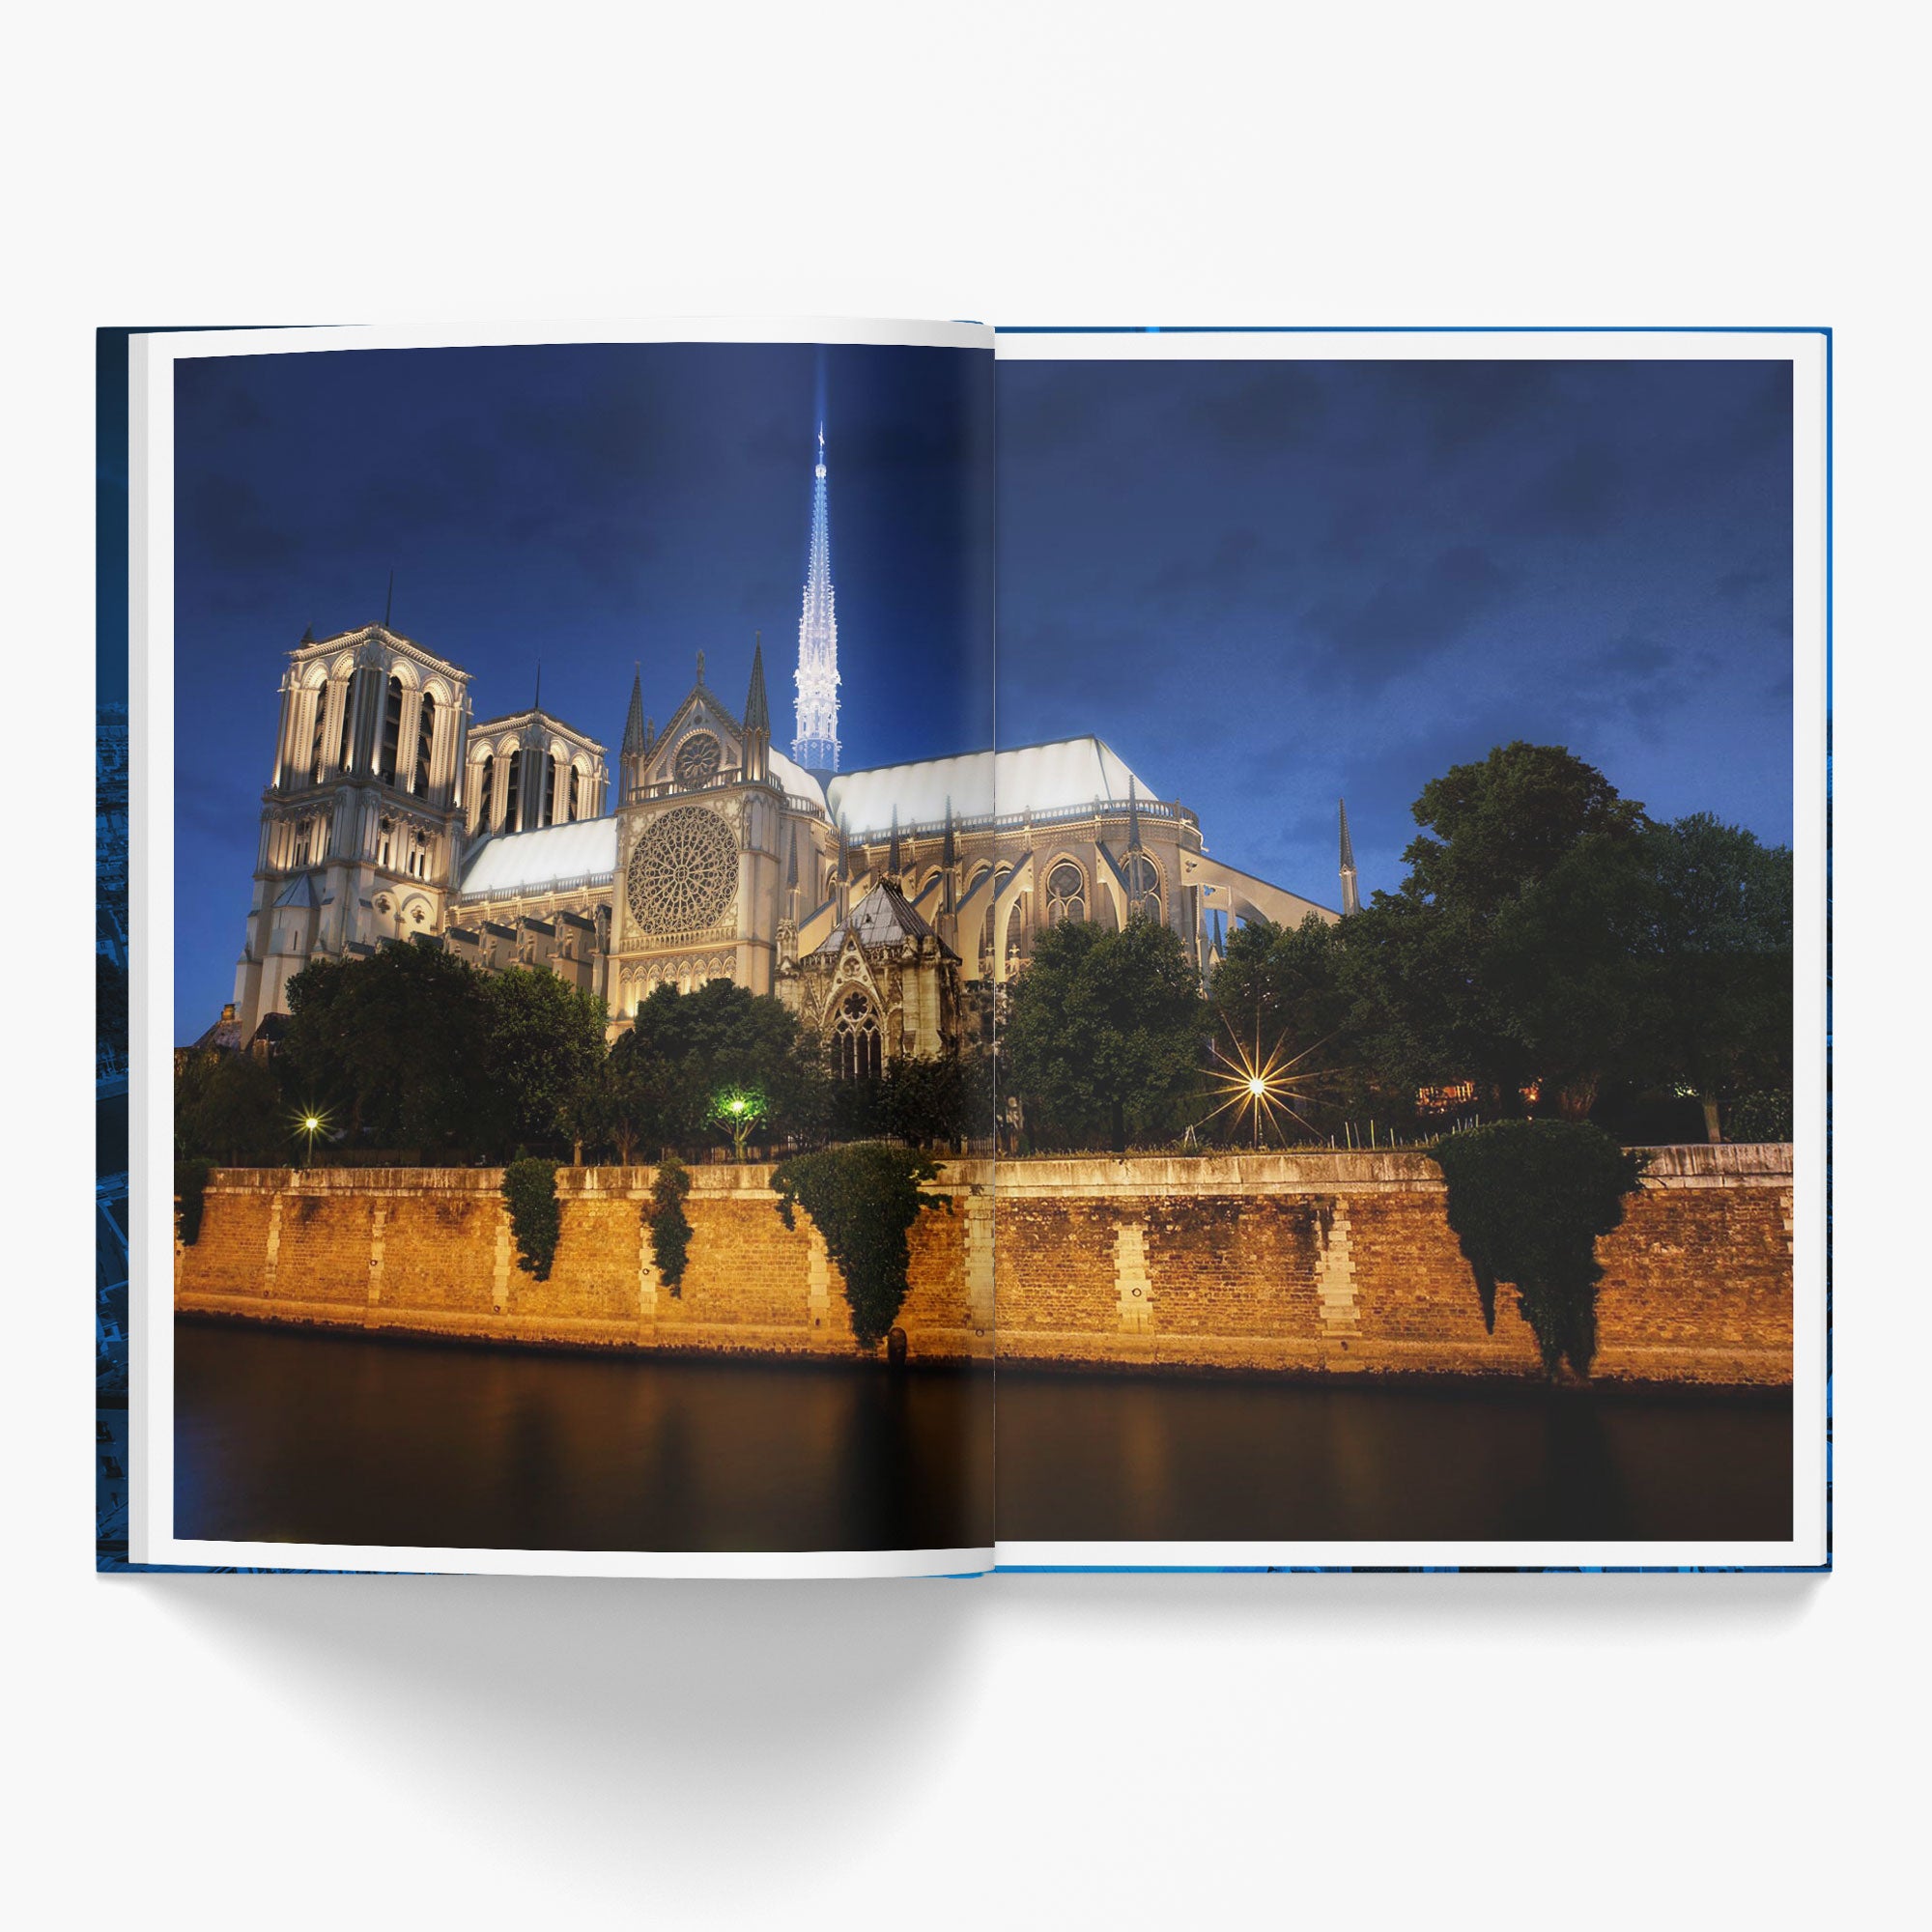 Top 50 Visions Of Notre Dame - 